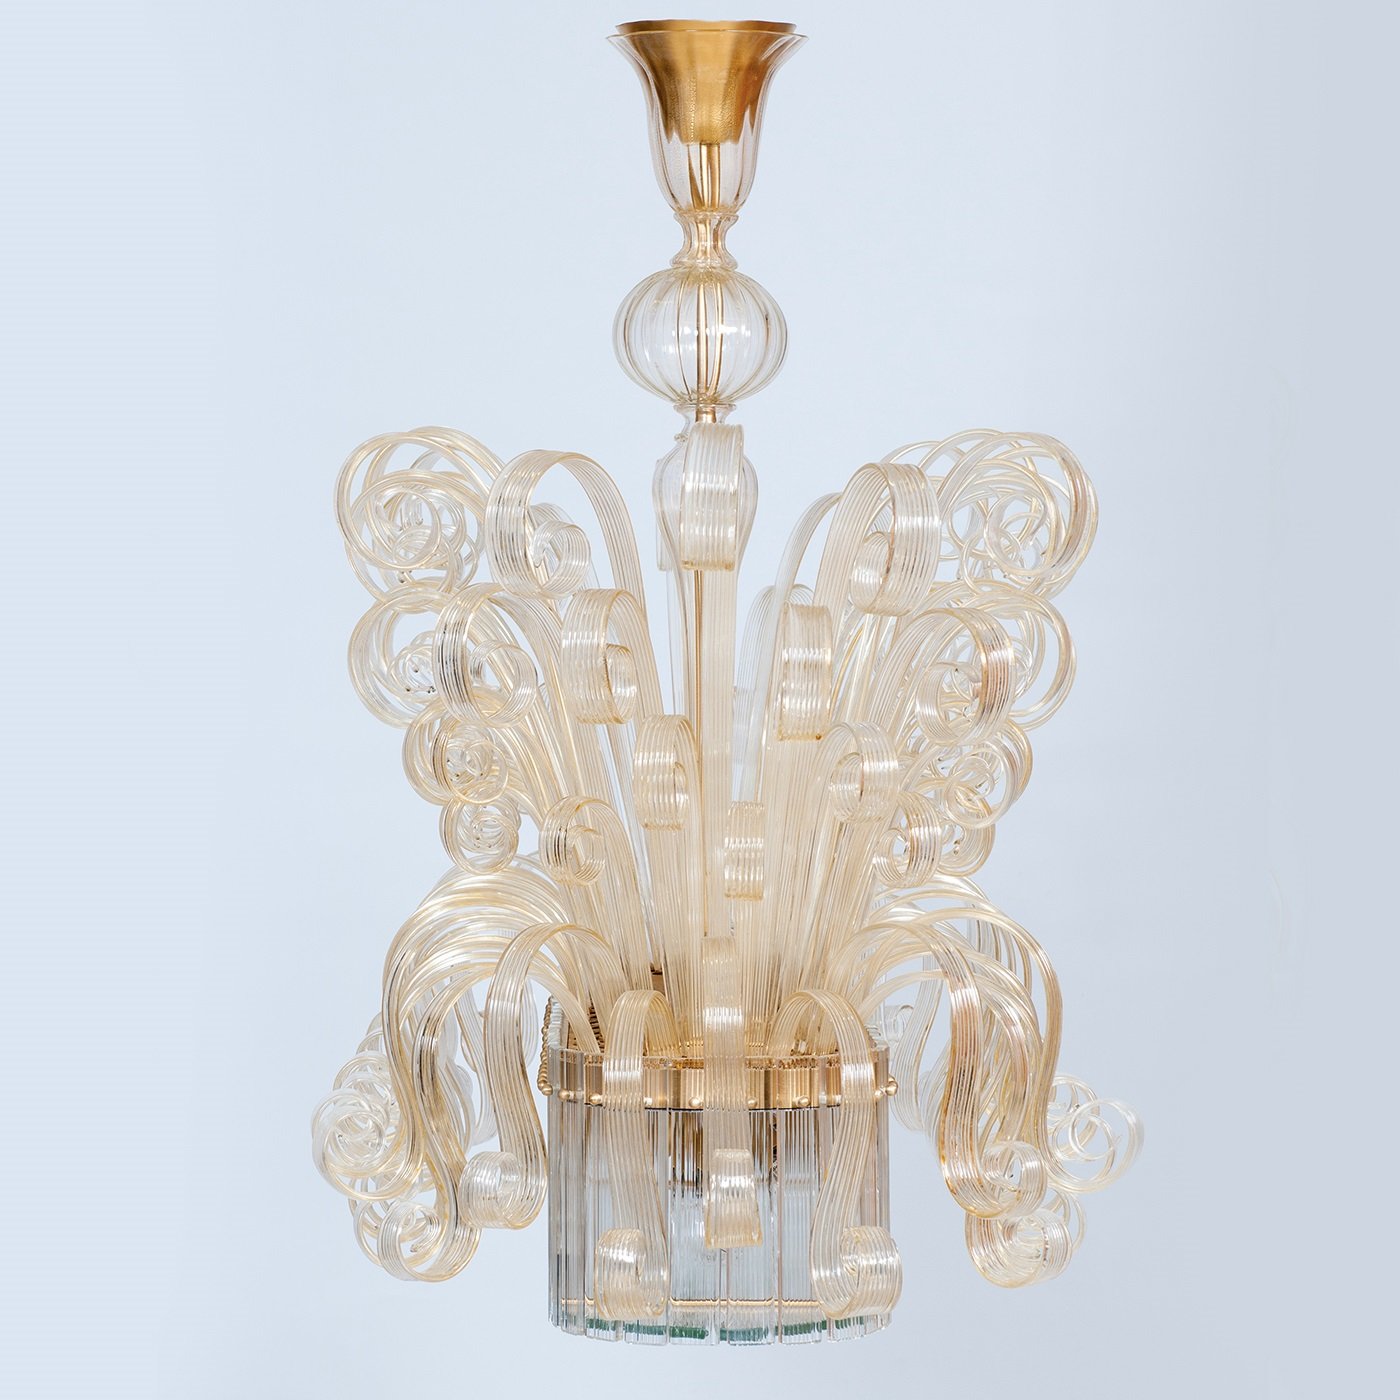 Limited Edition Italian Chandelier with 24K Gold - Alternative view 3